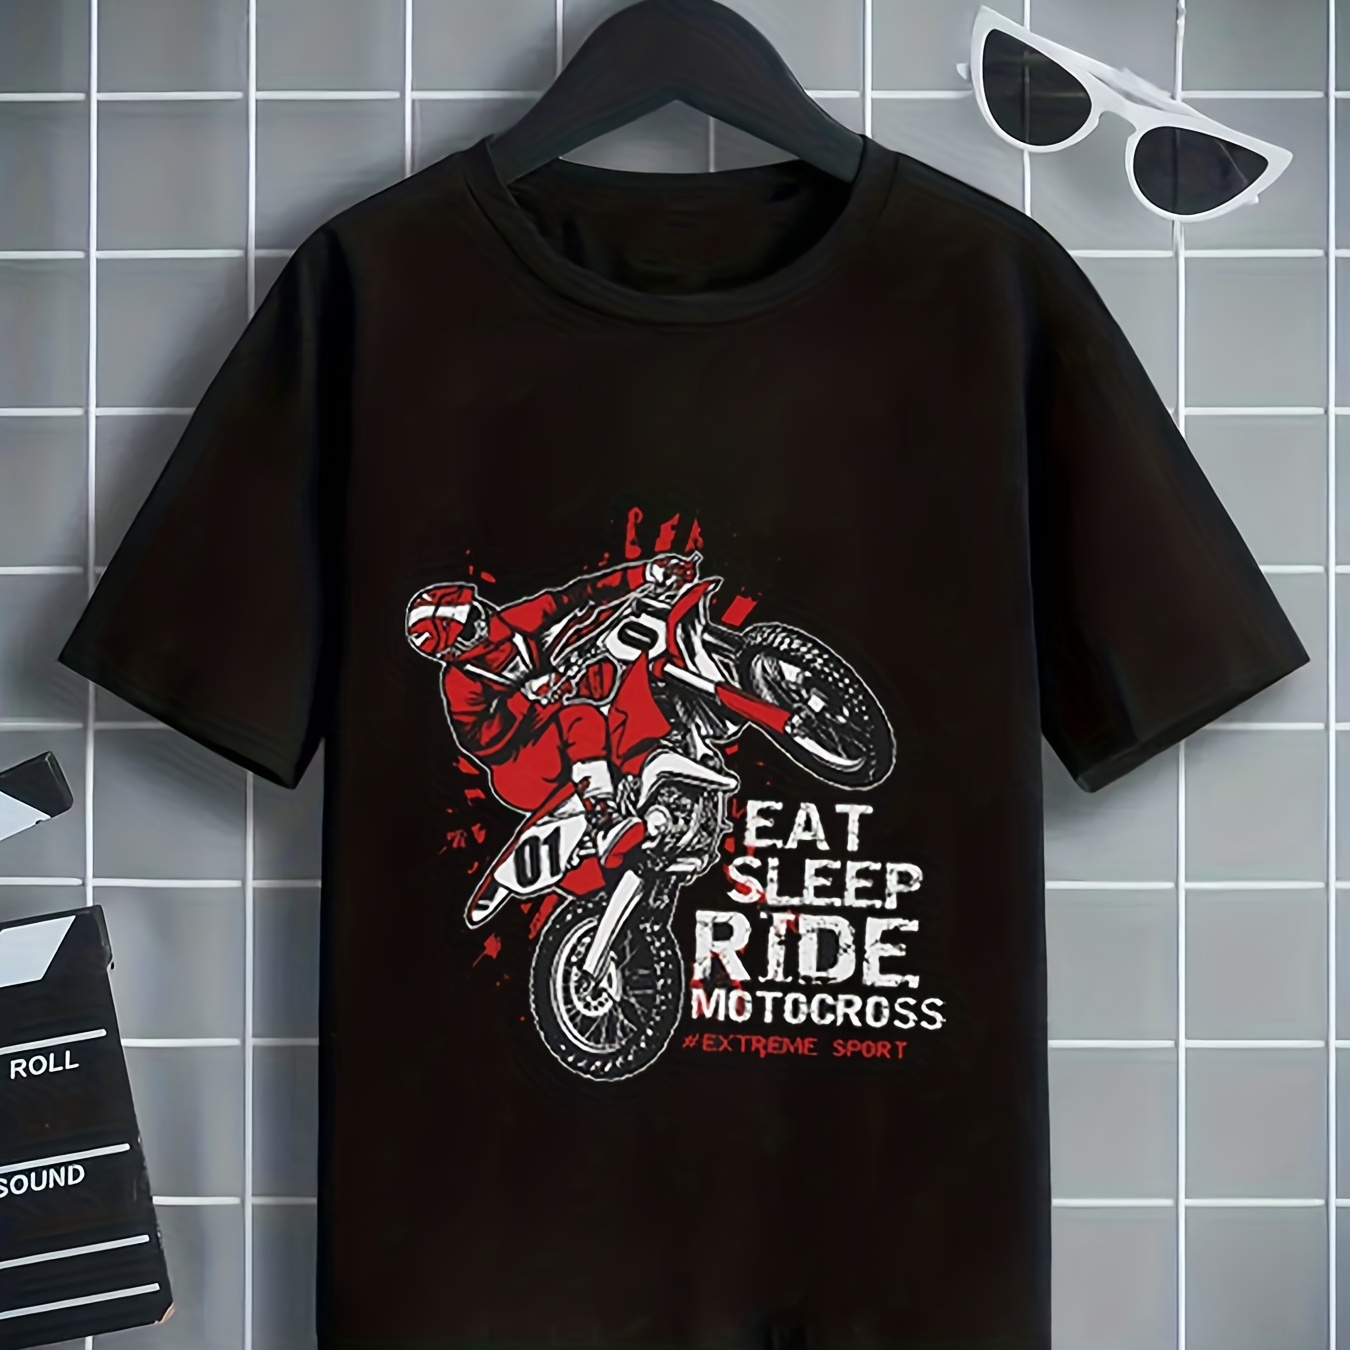 

eat, Sleep, Ride Motorcycles" Round Neck Cotton T-shirt Tees Tops Casual Soft Comfortable Boys And Girls Summer Clothes